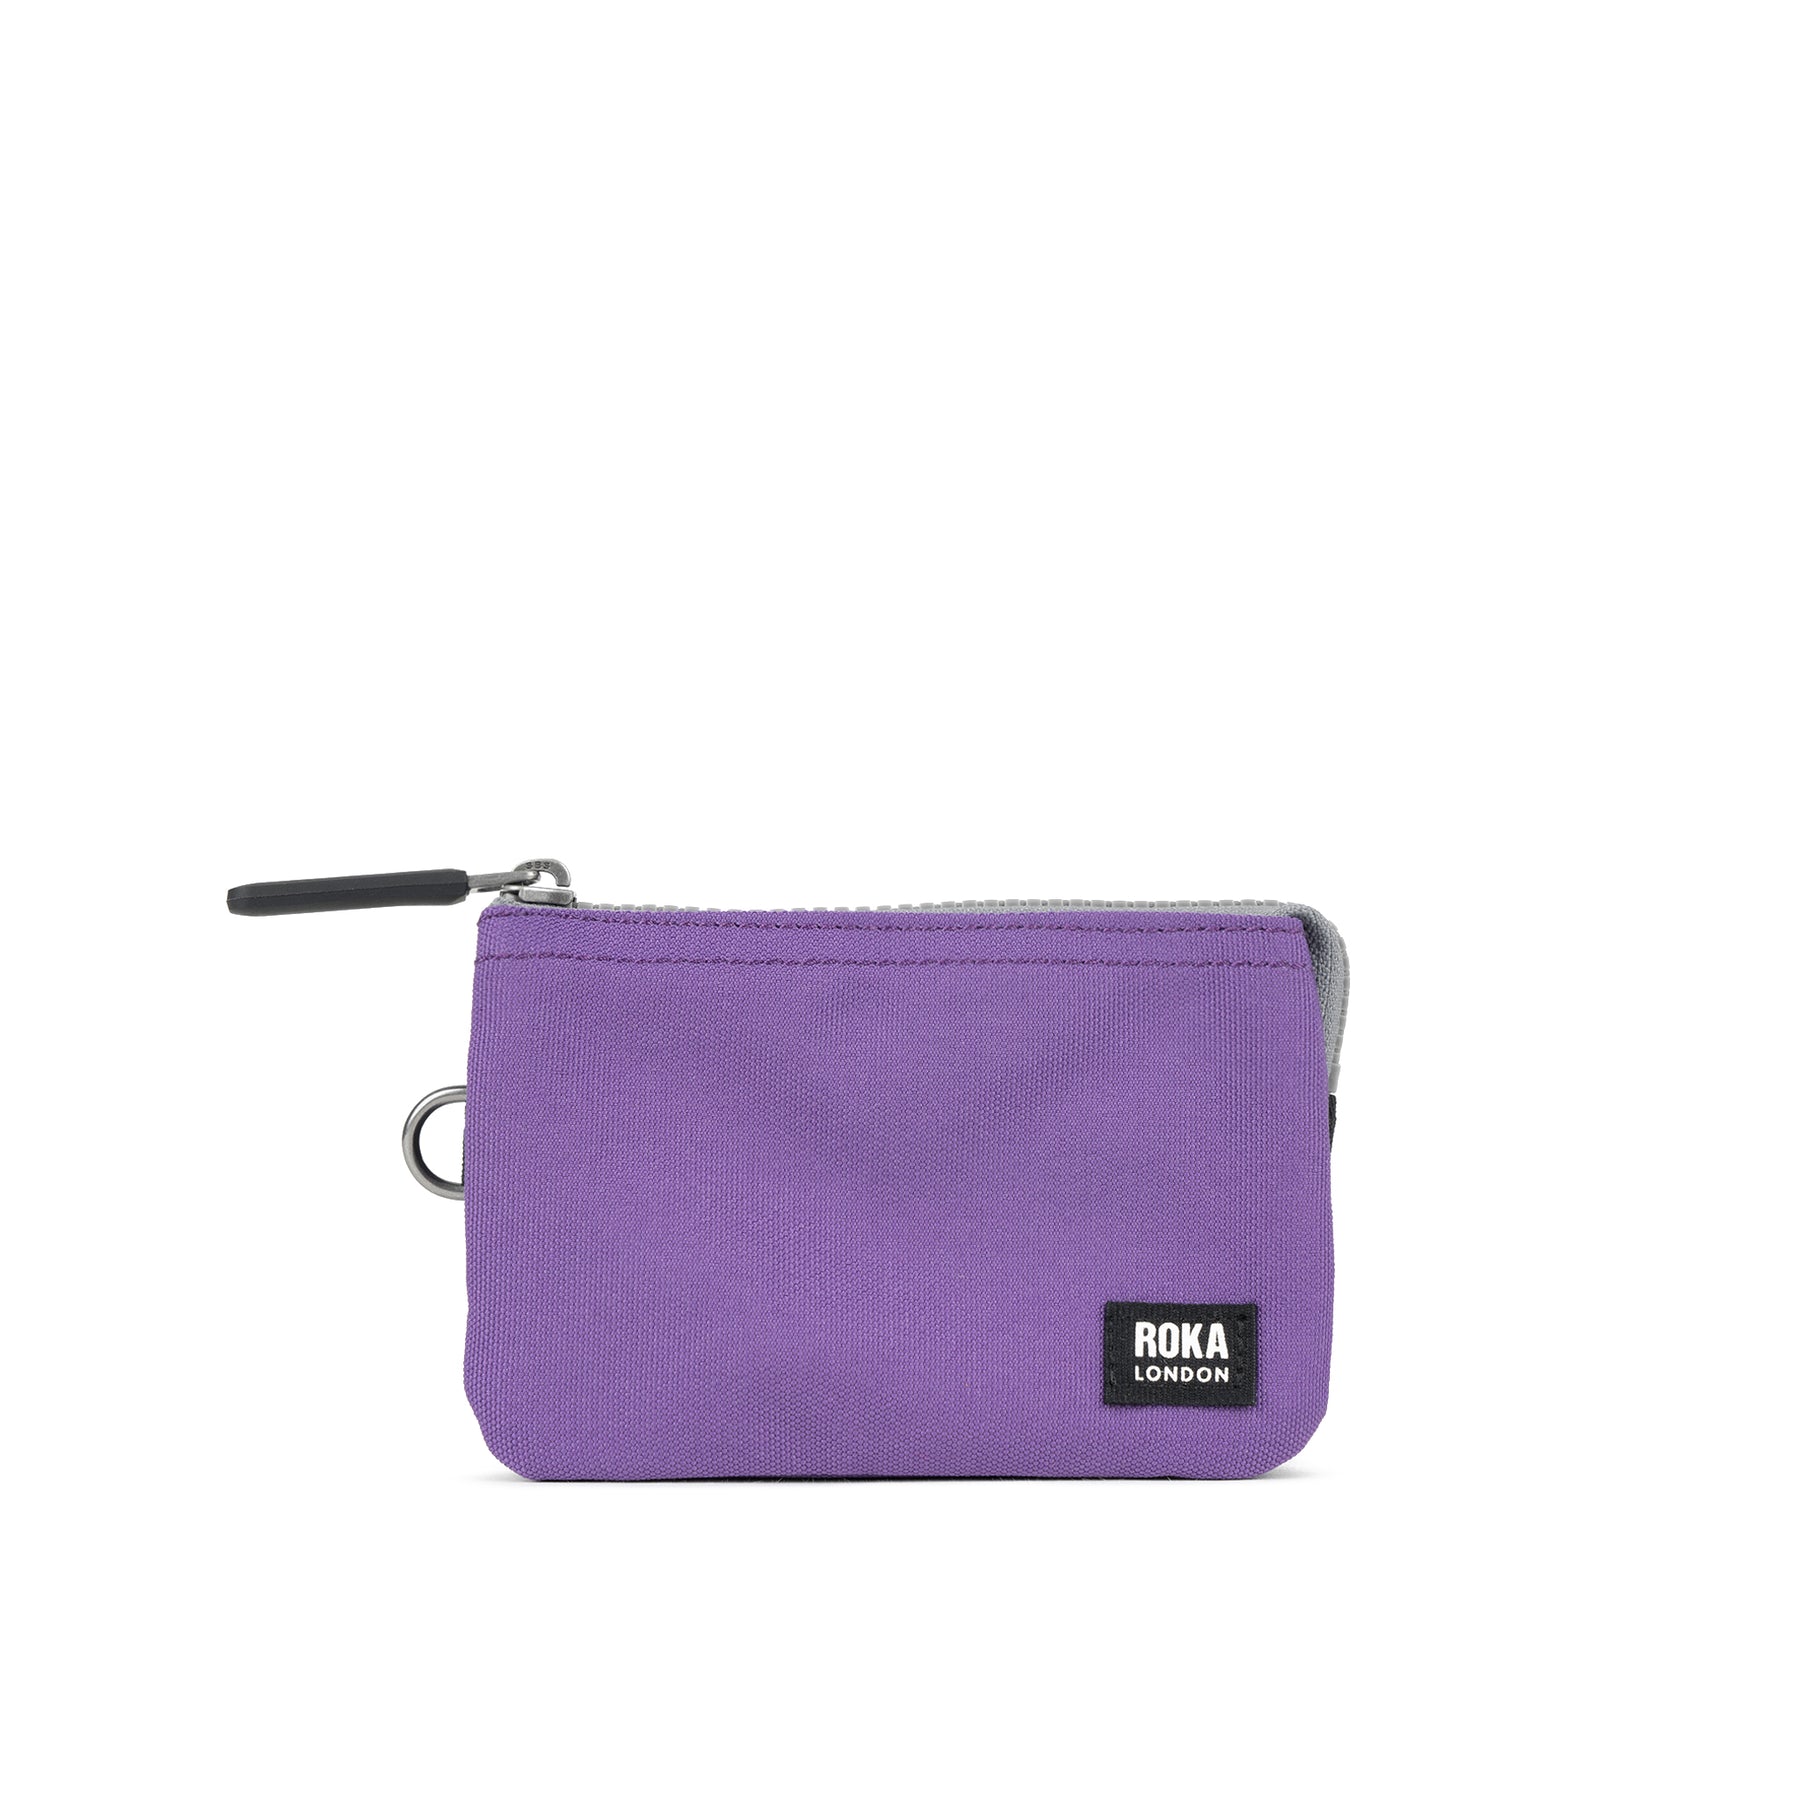 ROKA Black Label Carnaby Imperial Purple Small Recycled Canvas Bag - OS